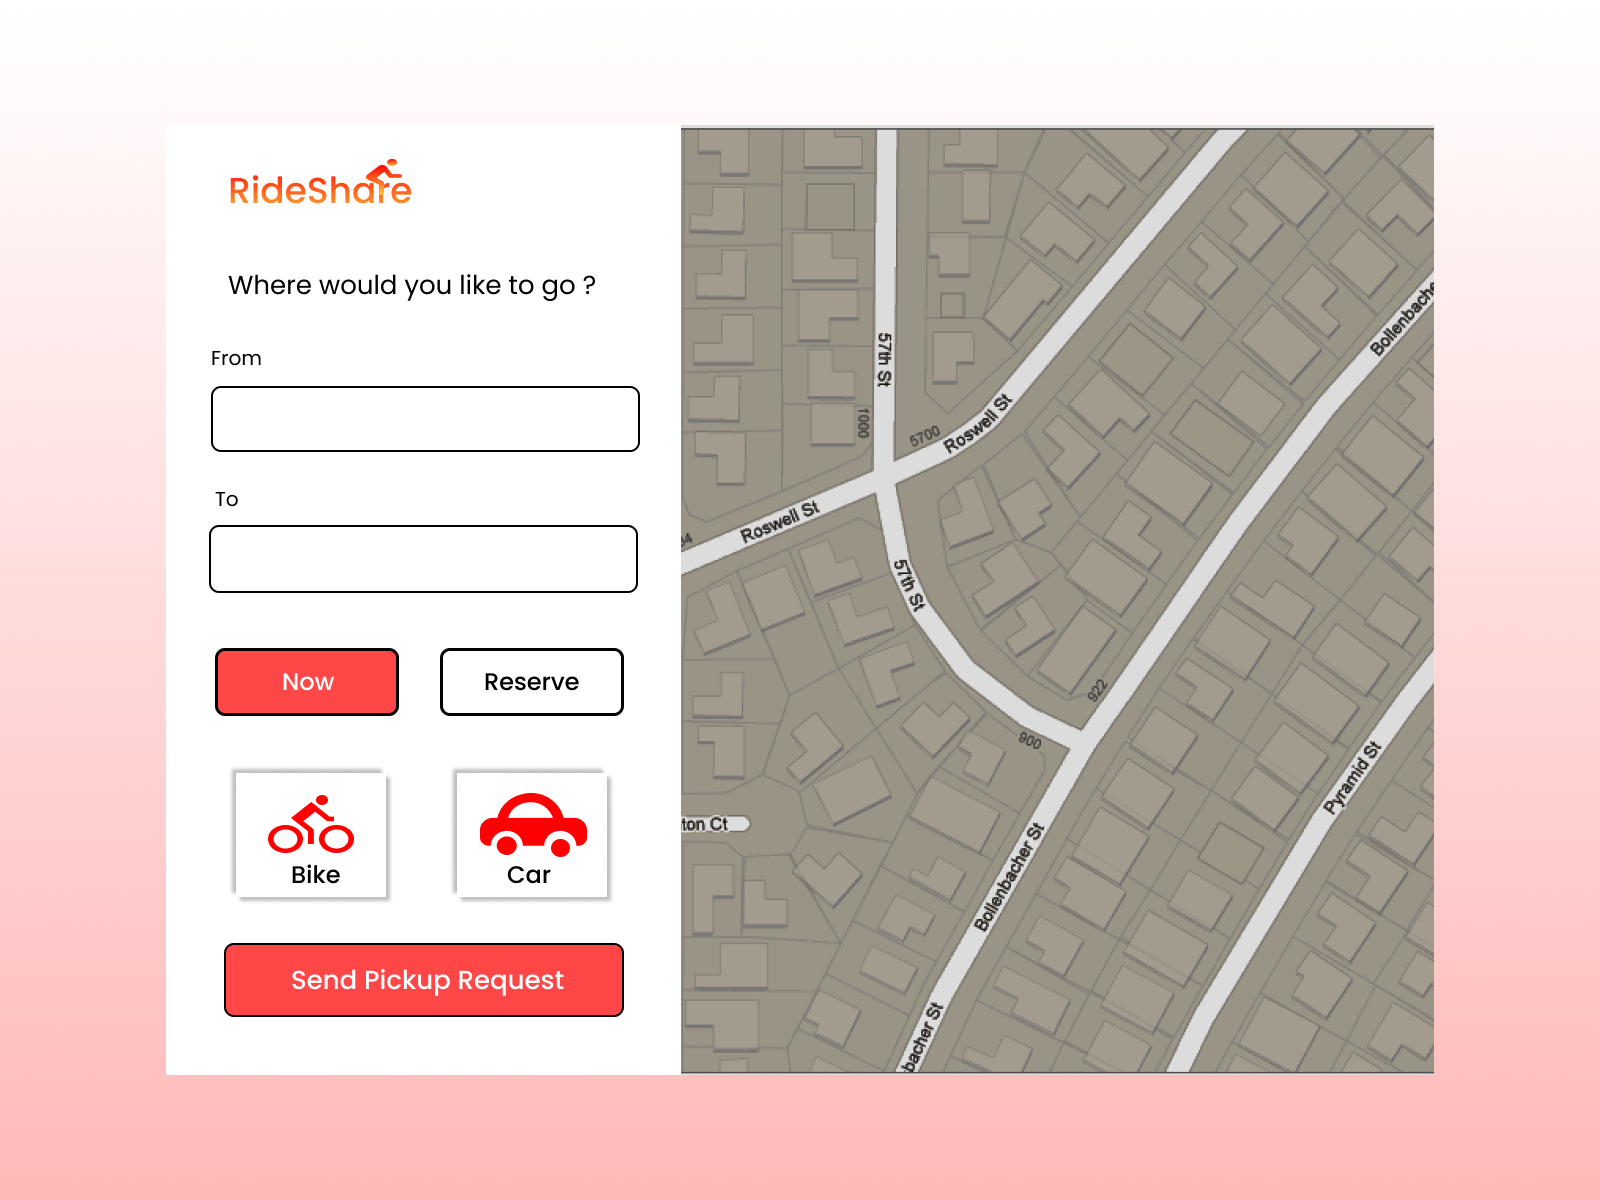 Location Tracker by Hassaan on Dribbble